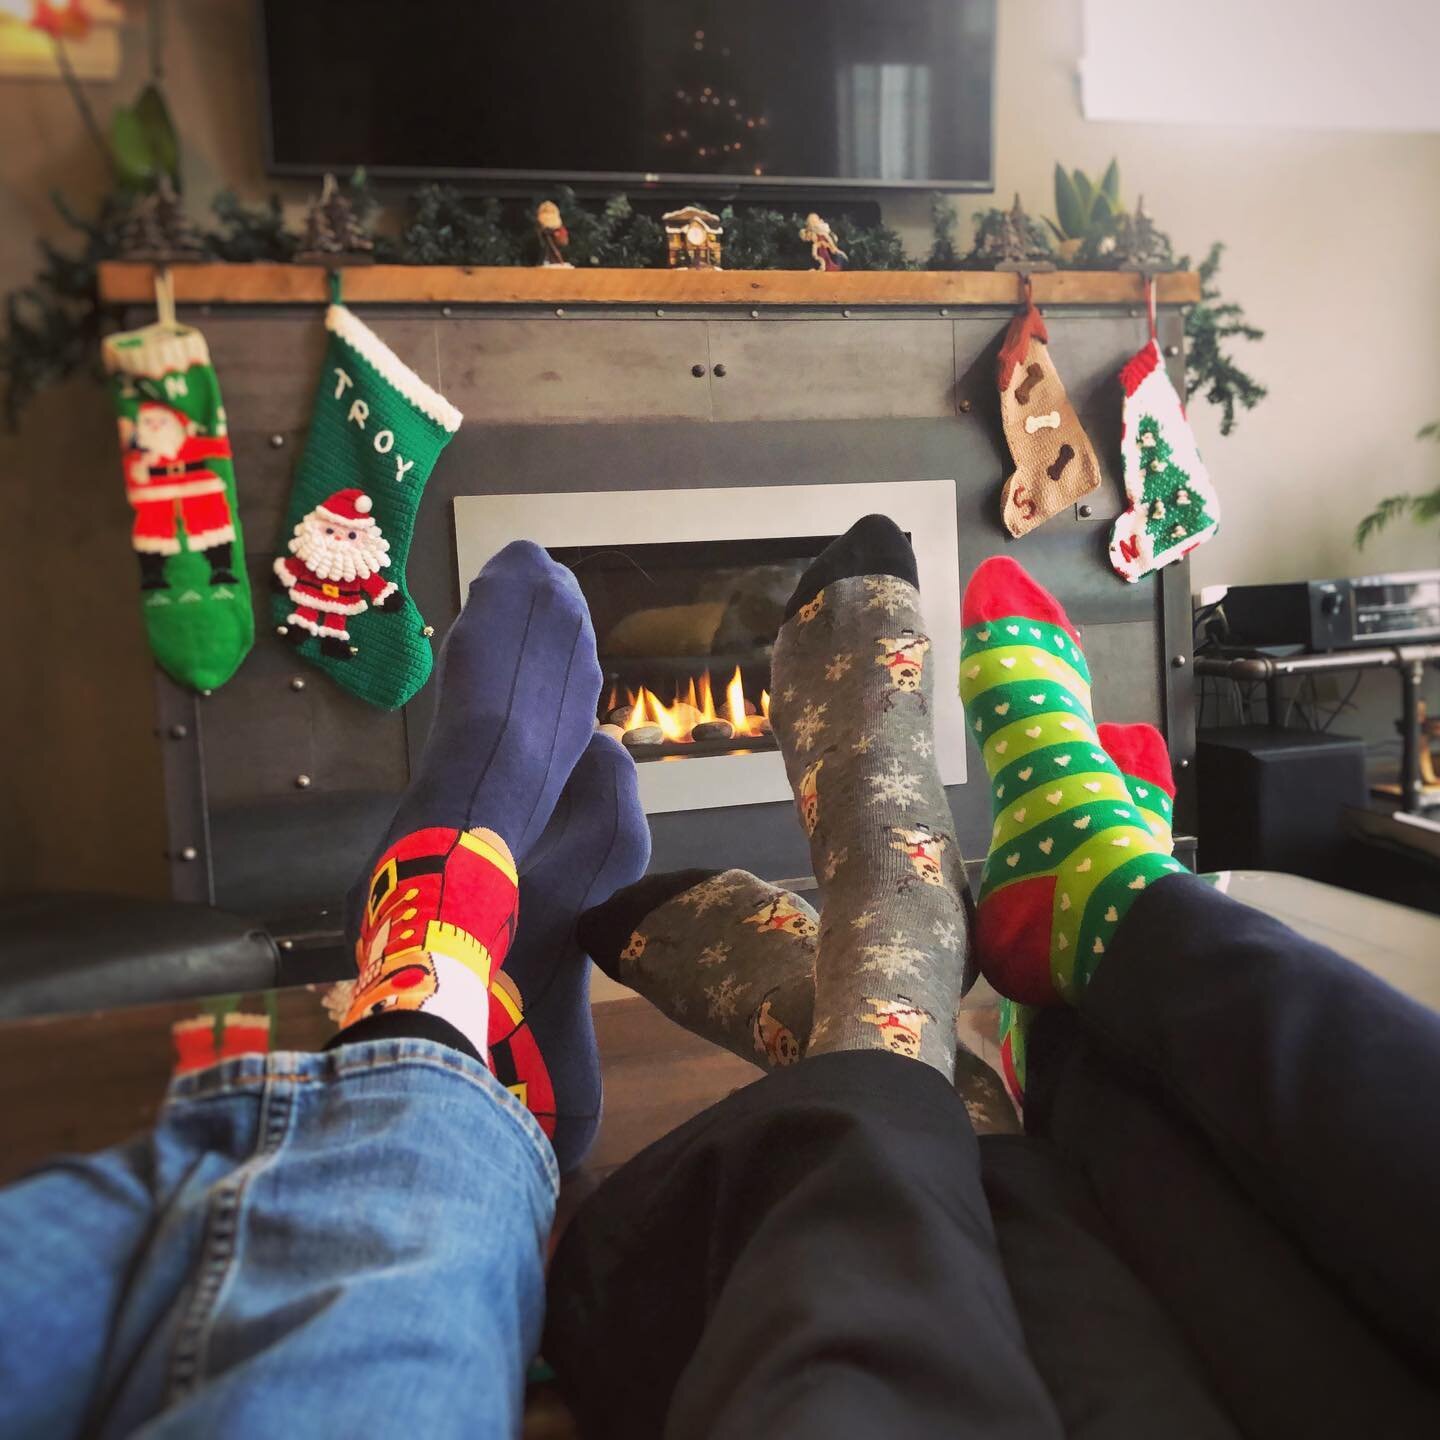 The feet are in the Christmas spirit! ????????????☃️ #christmas2020